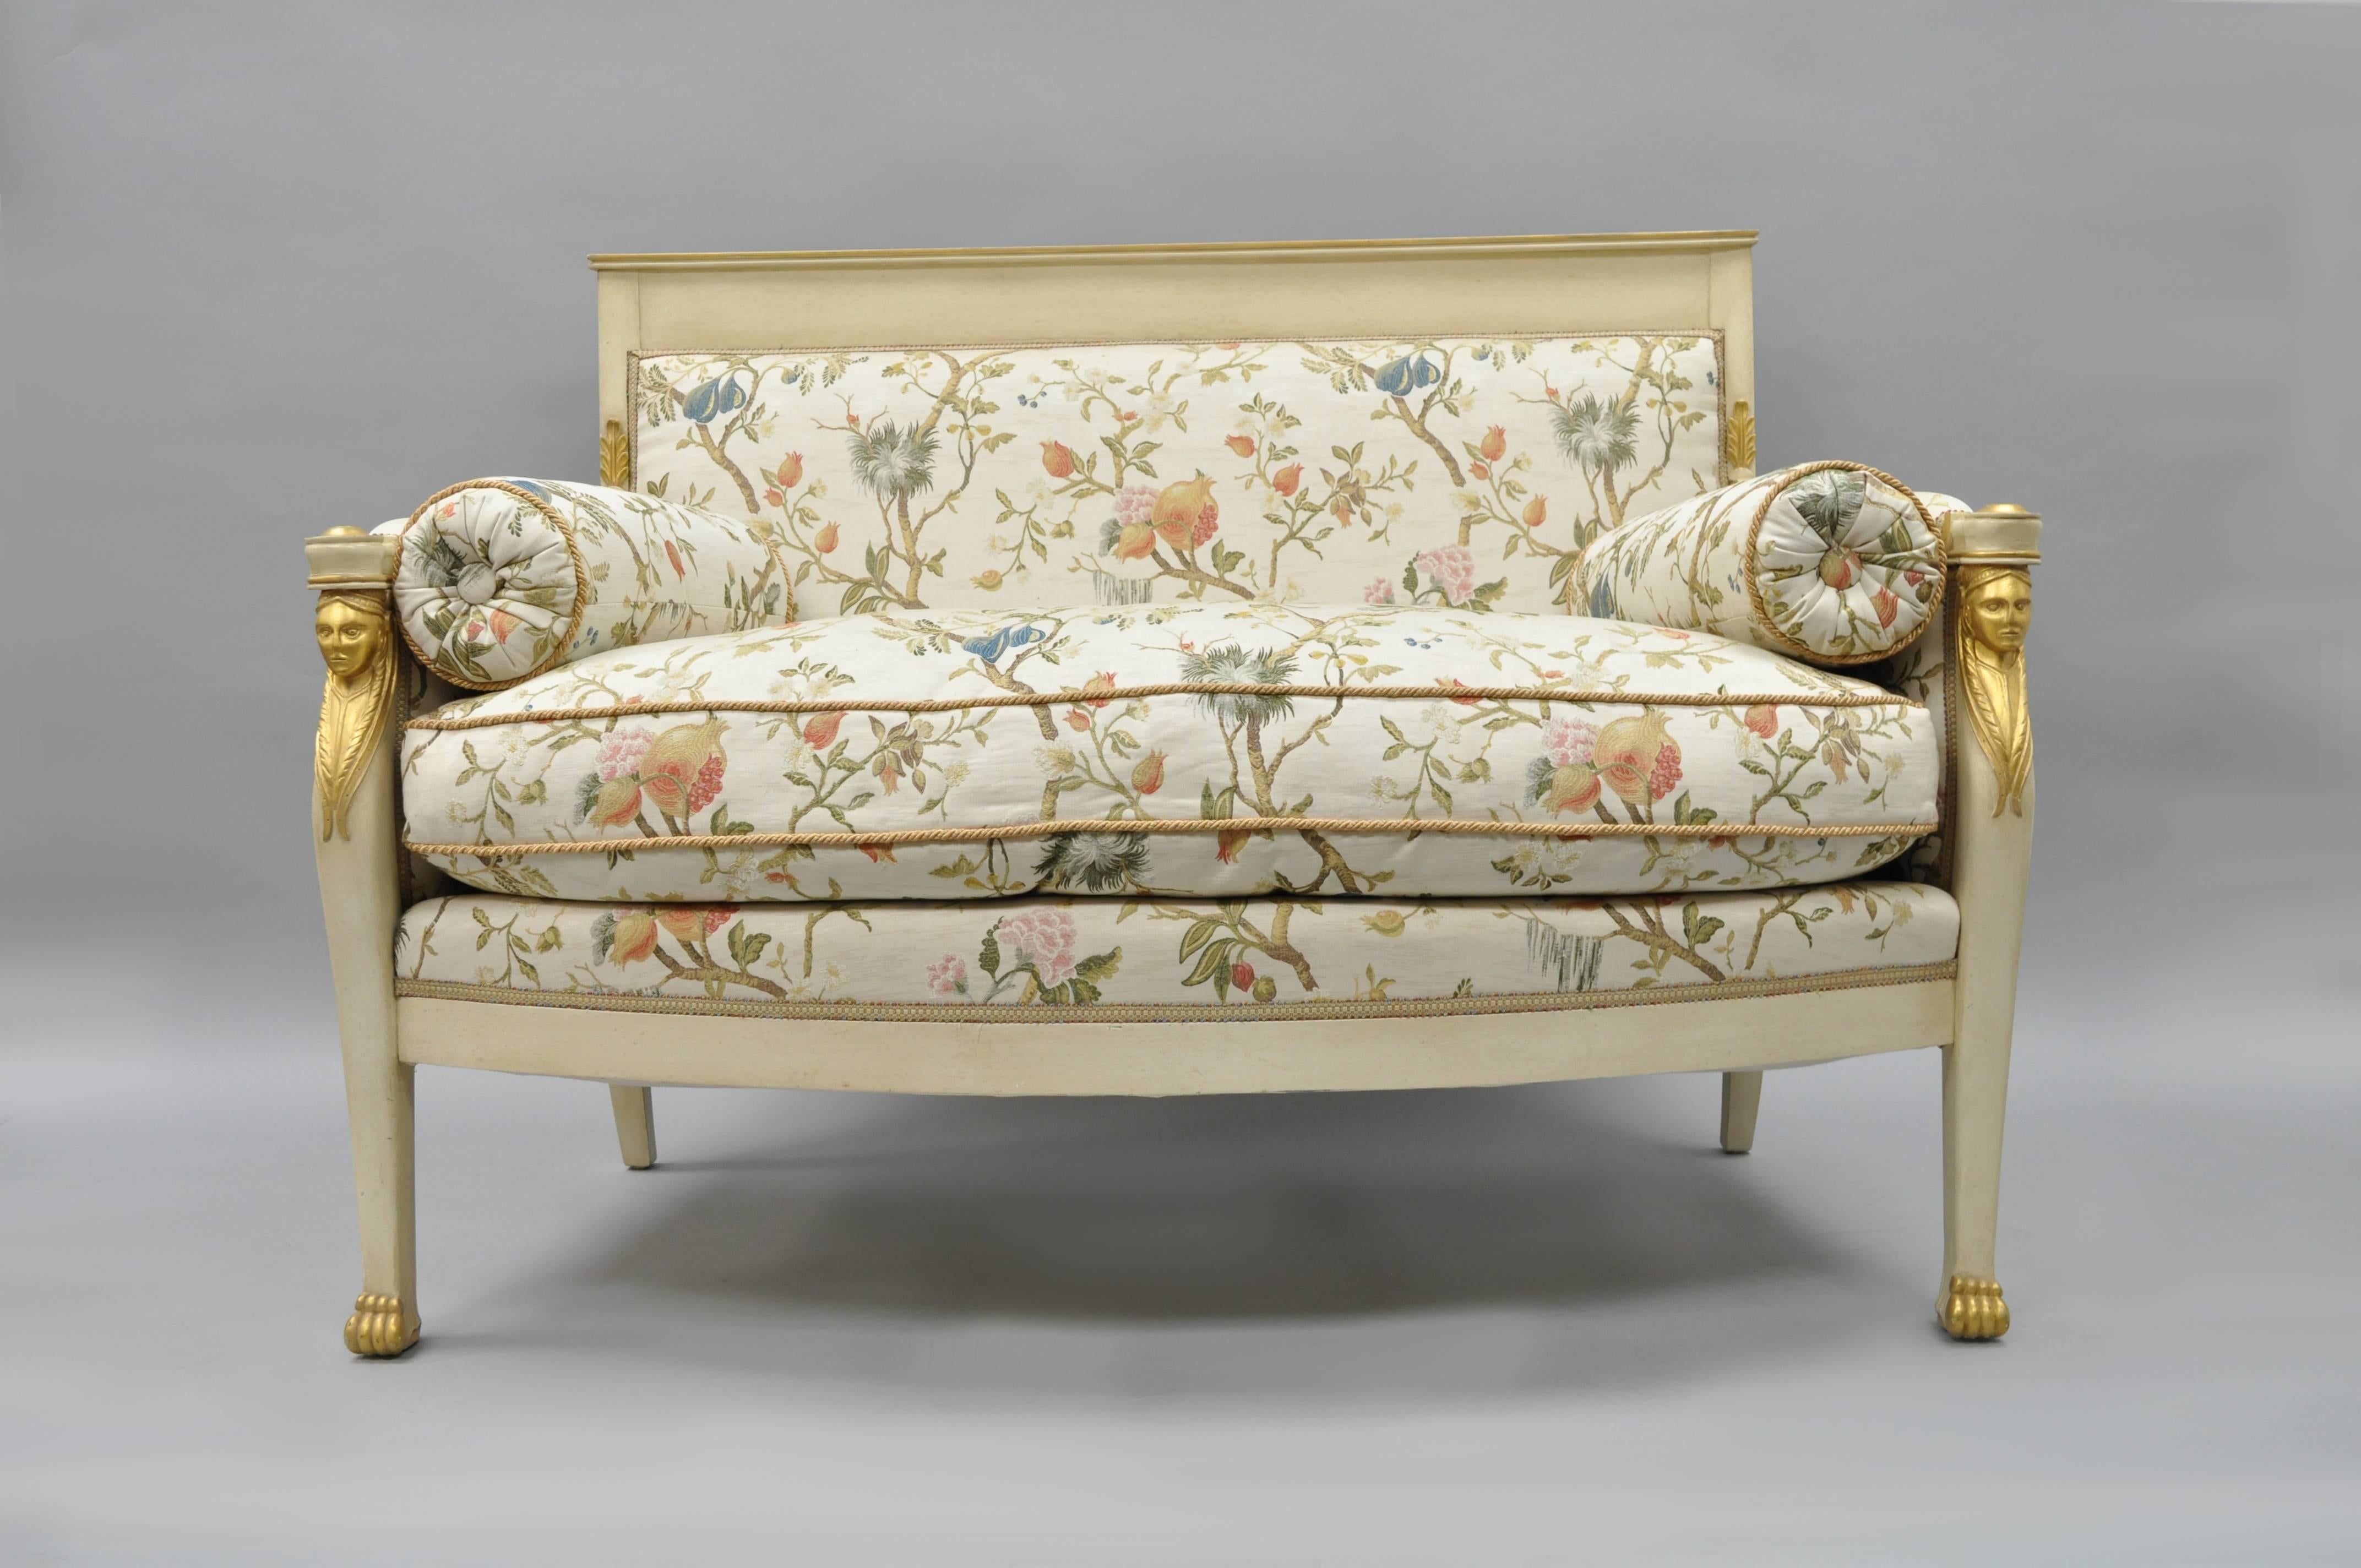 Stunning Early 20th Century French Neoclassical / Empire style figural gold gilt and cream painted settee covered in newer silk Scalamandre fabric with roped trim and down filled loose cushion. Item featured a solid carved wood frame, paw feet,